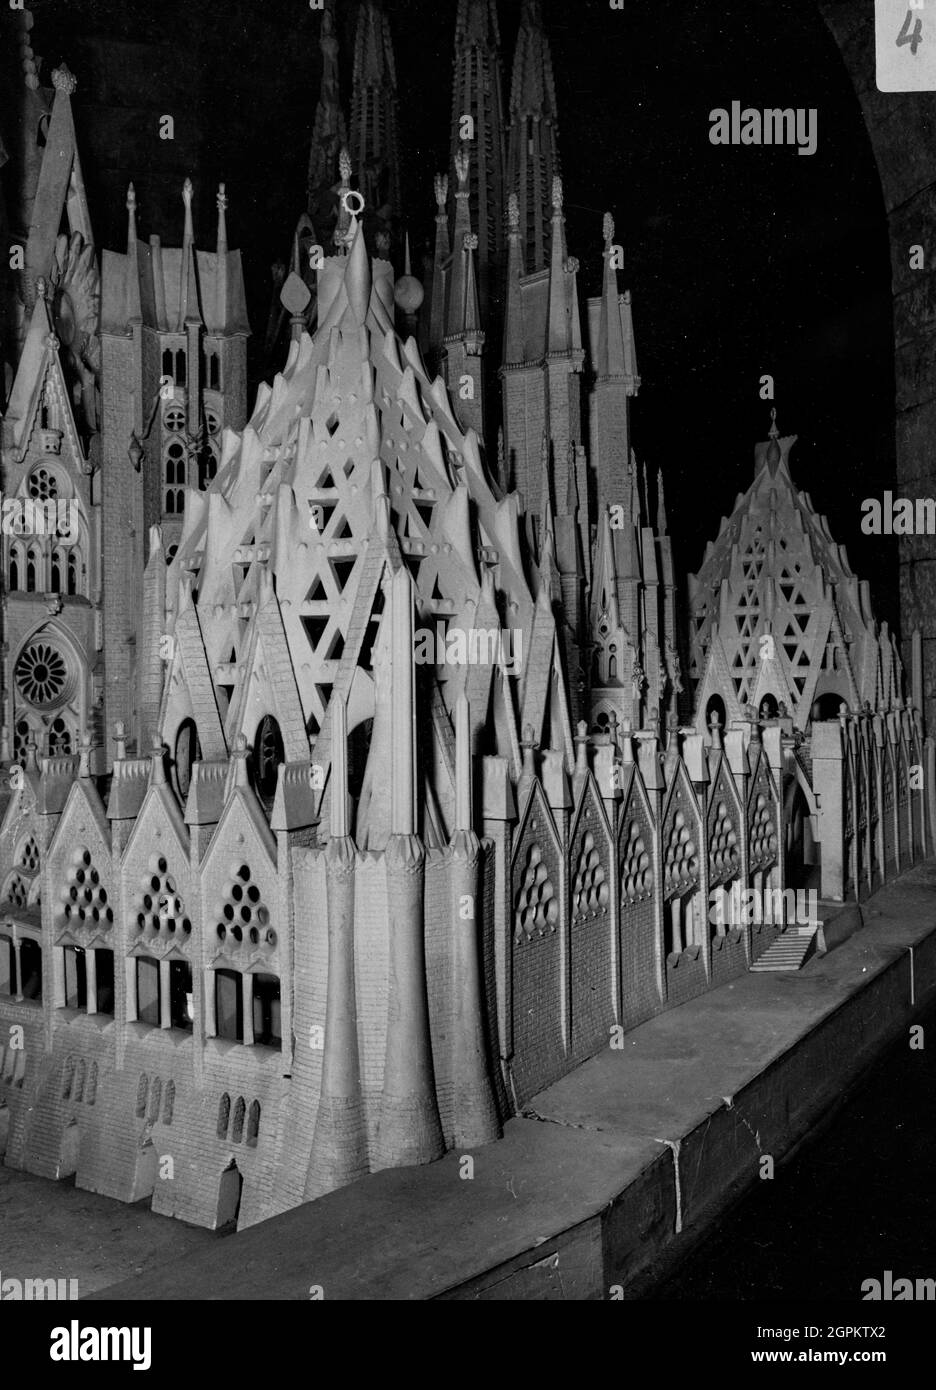 Sagrada Familia (museum in the crypt of the Passion Facade): parabolic model of the sacristy dome (E: 1:25) of the great scaled plaster model made by Gaudí for the Sagrada Familia from 1914 onwards (1926) destroyed during 1936-39 Spanish Civil War and restored after (1970). Author: ANTONI GAUDI. Stock Photo